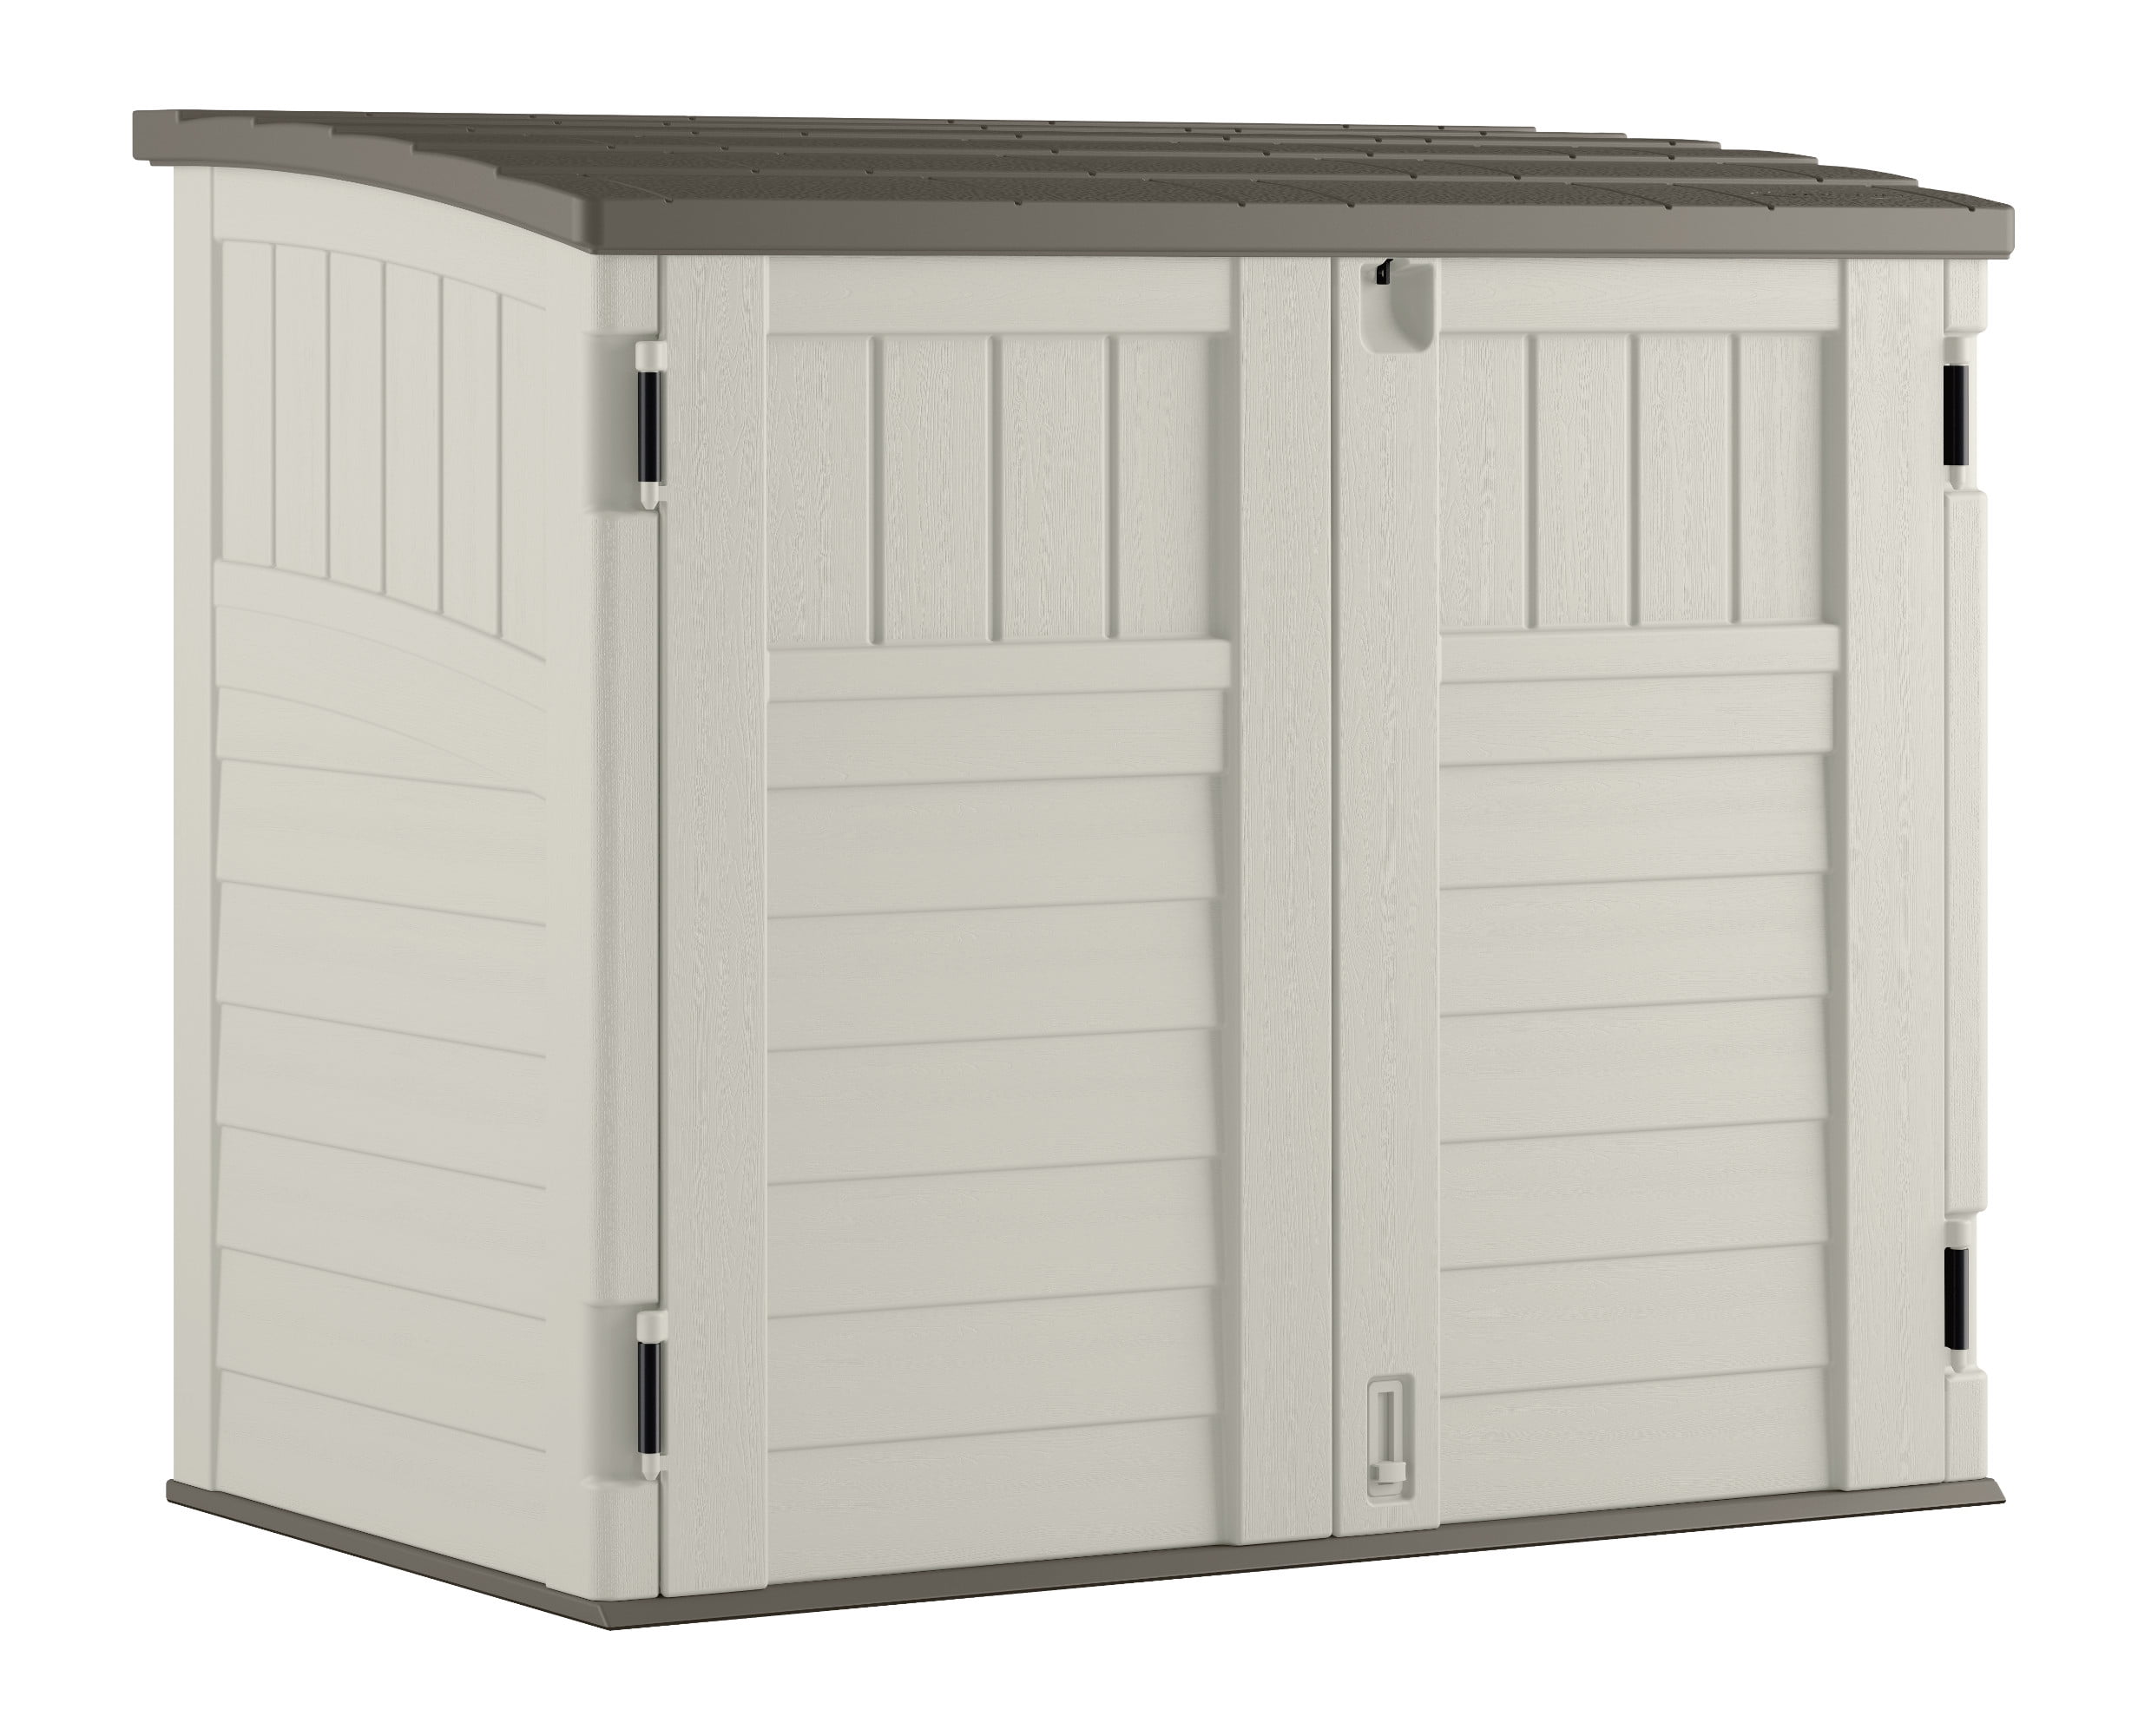 Horizontal Outdoor Resin Storage Shed